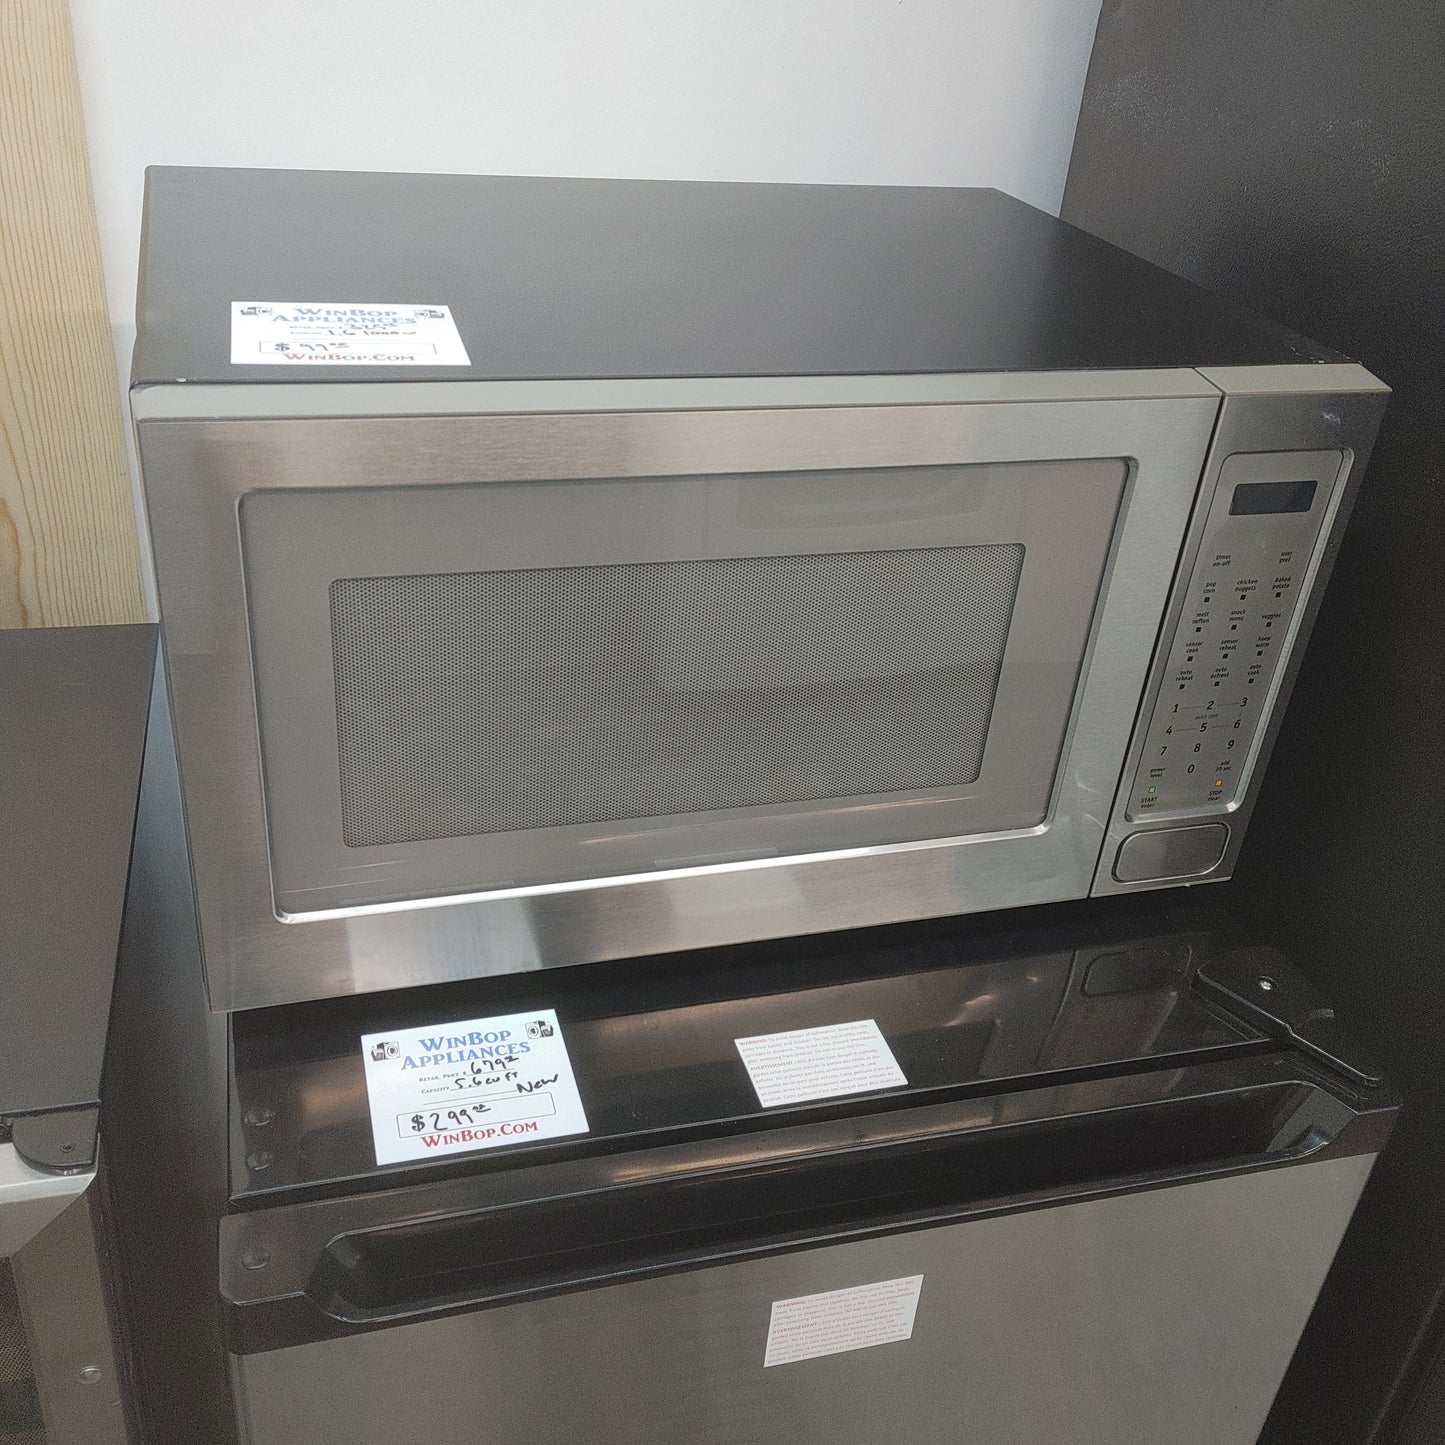 Used Samsung 1.6 cubic foot 1,000W countertop microwave